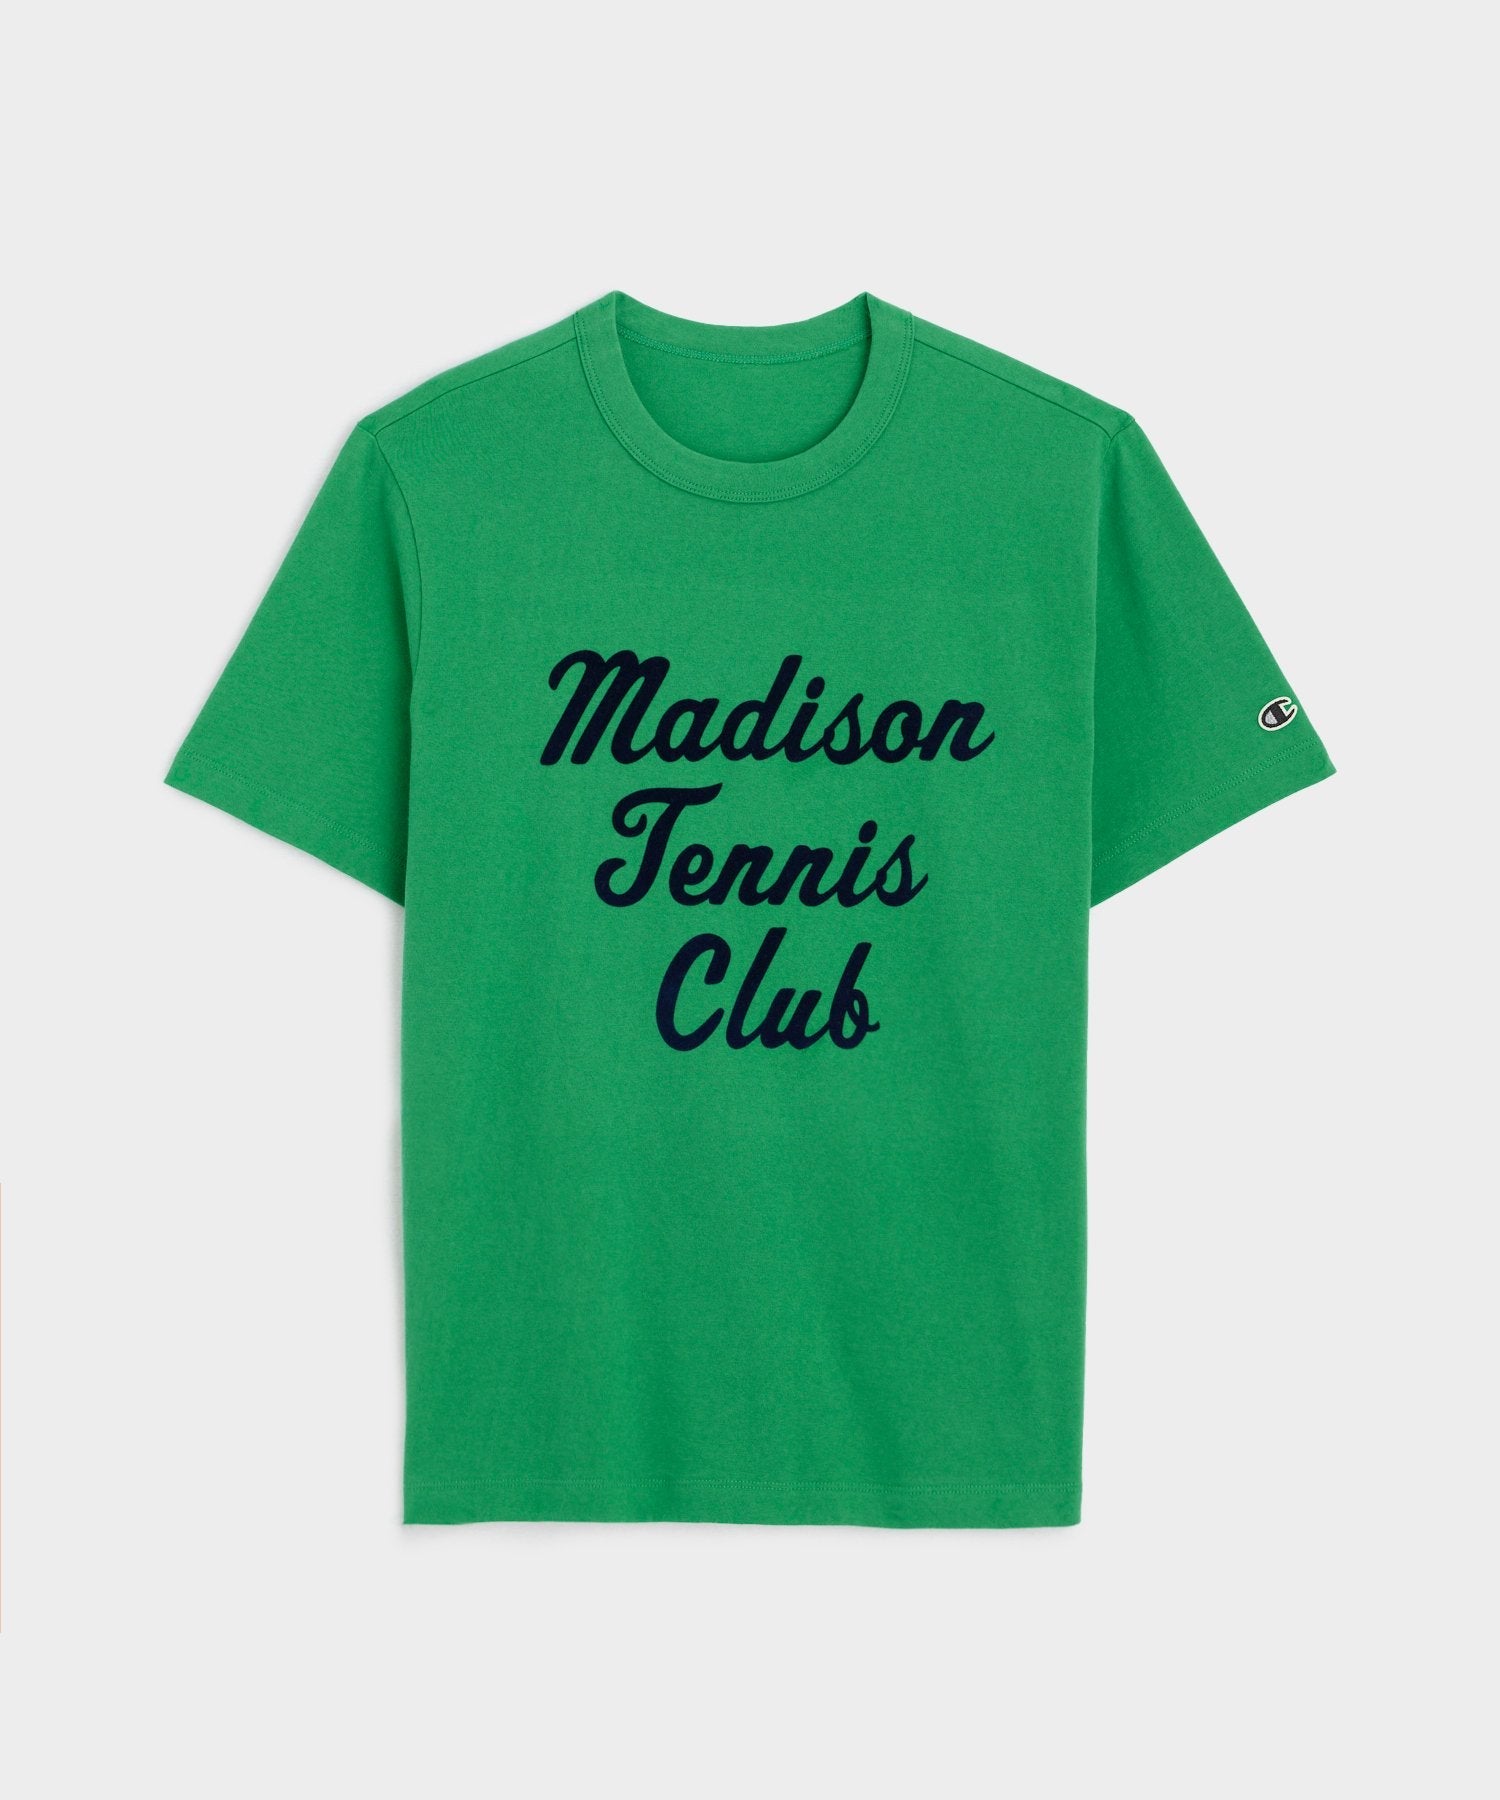 Madison Tennis Club Tee in Ivy